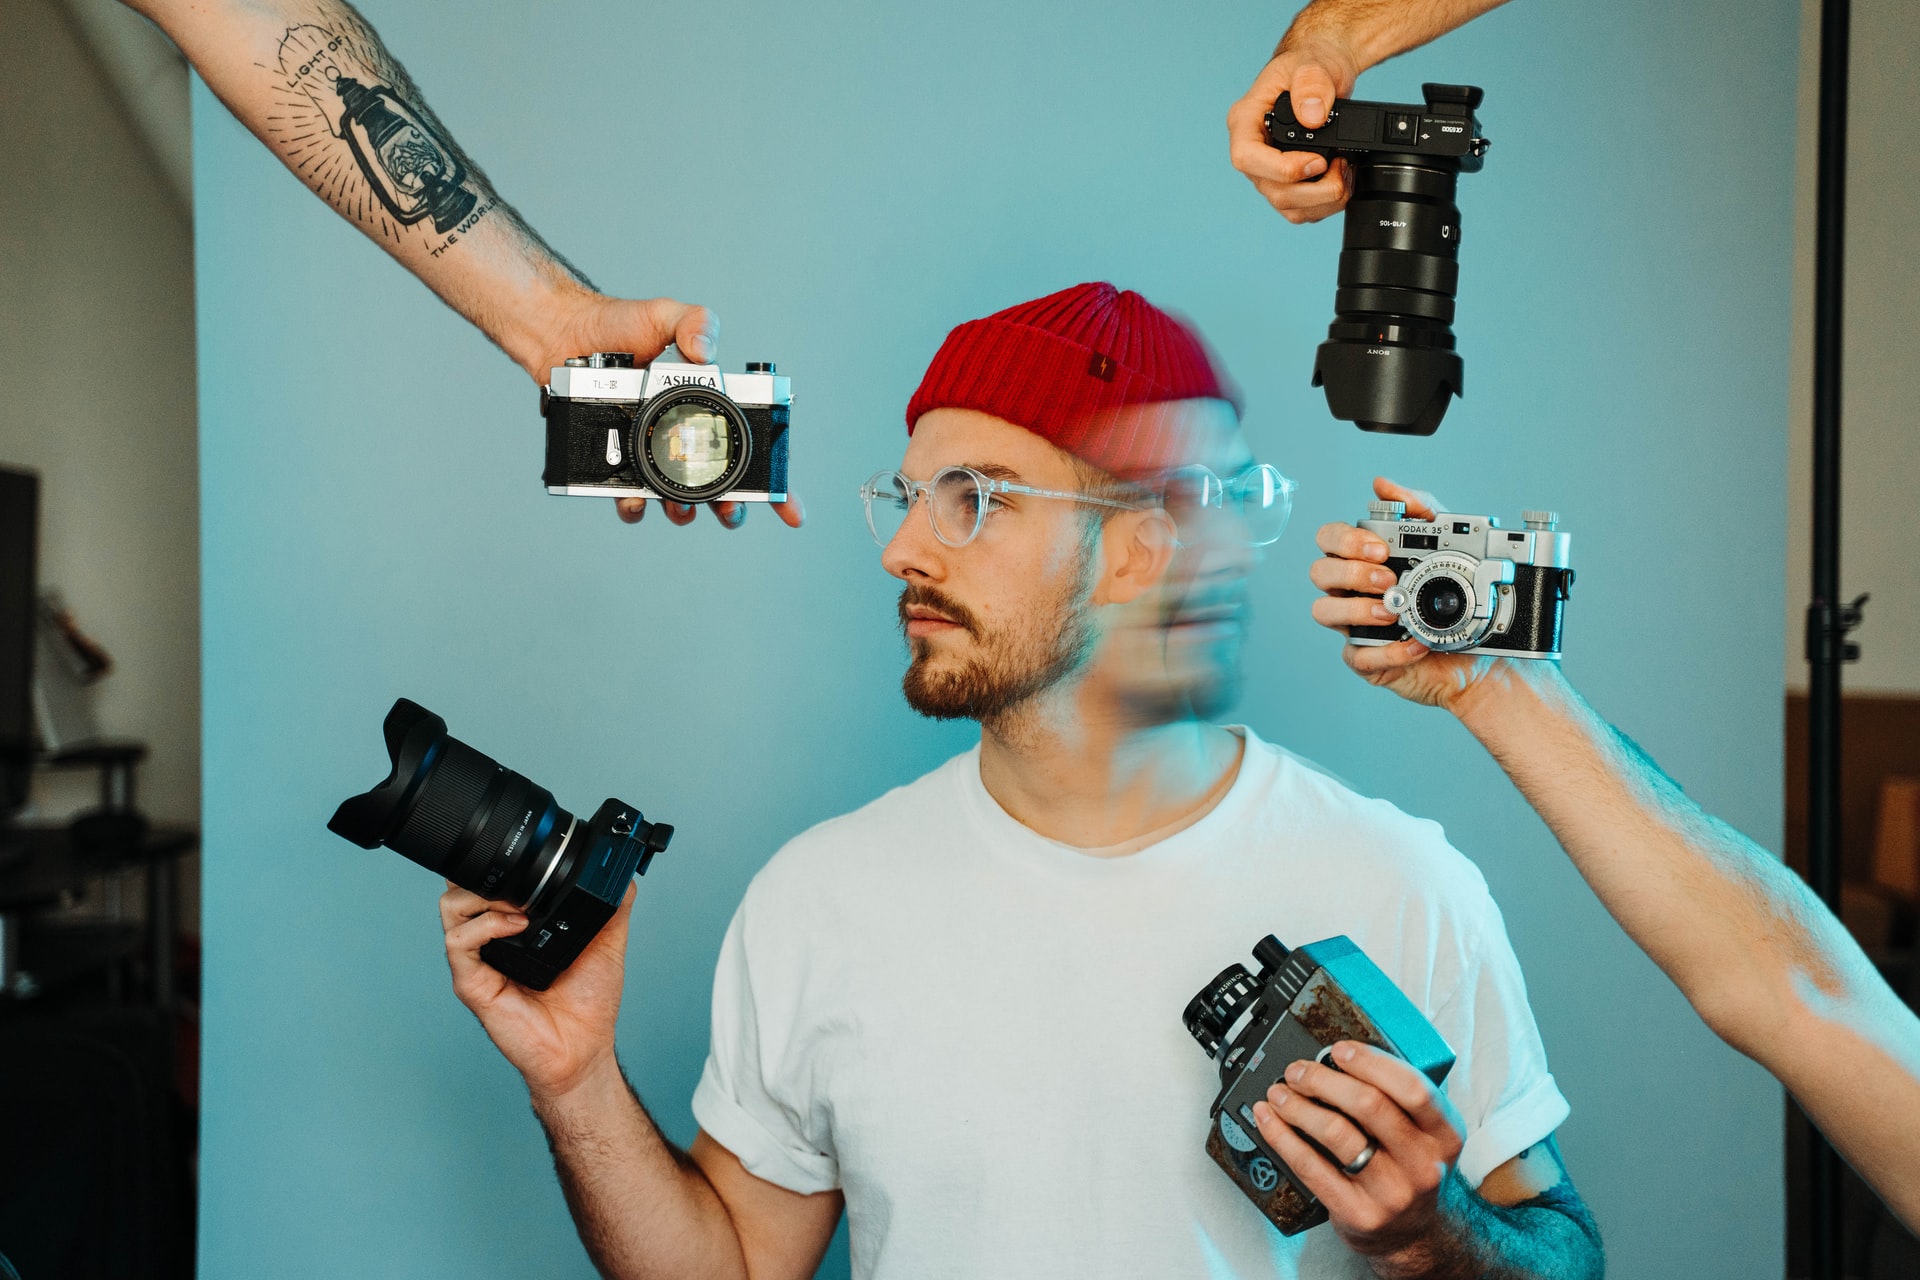 The Top 5 Don’ts of Stock Photography